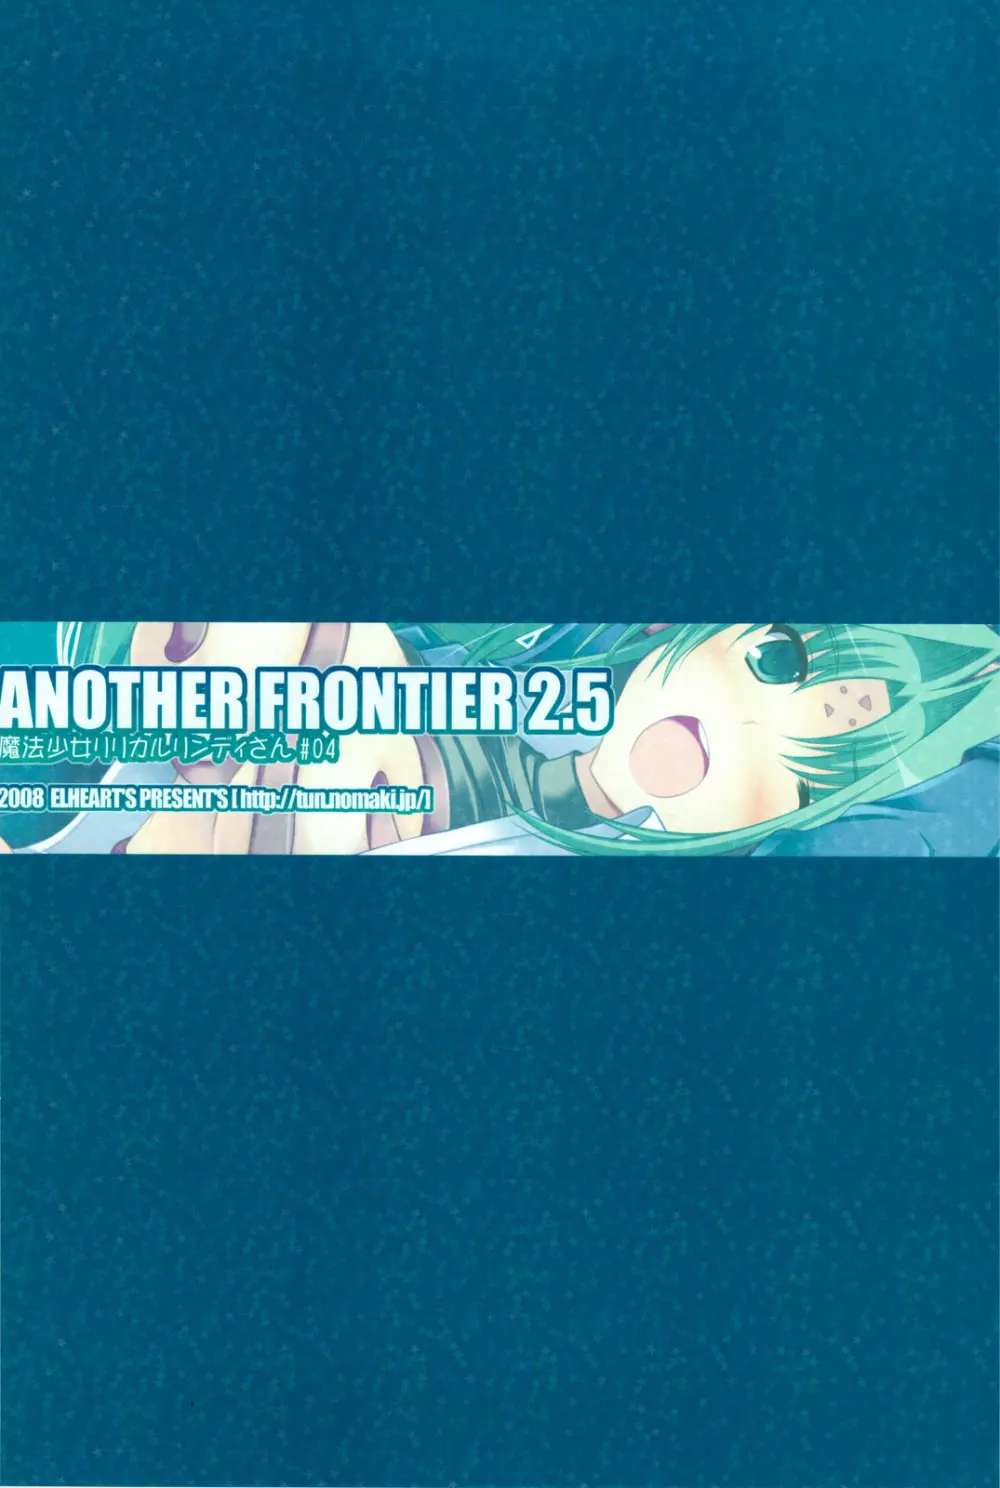 ANOTHER FRONTIER 2.5 魔法少女リリカルリンディさん #04 22ページ